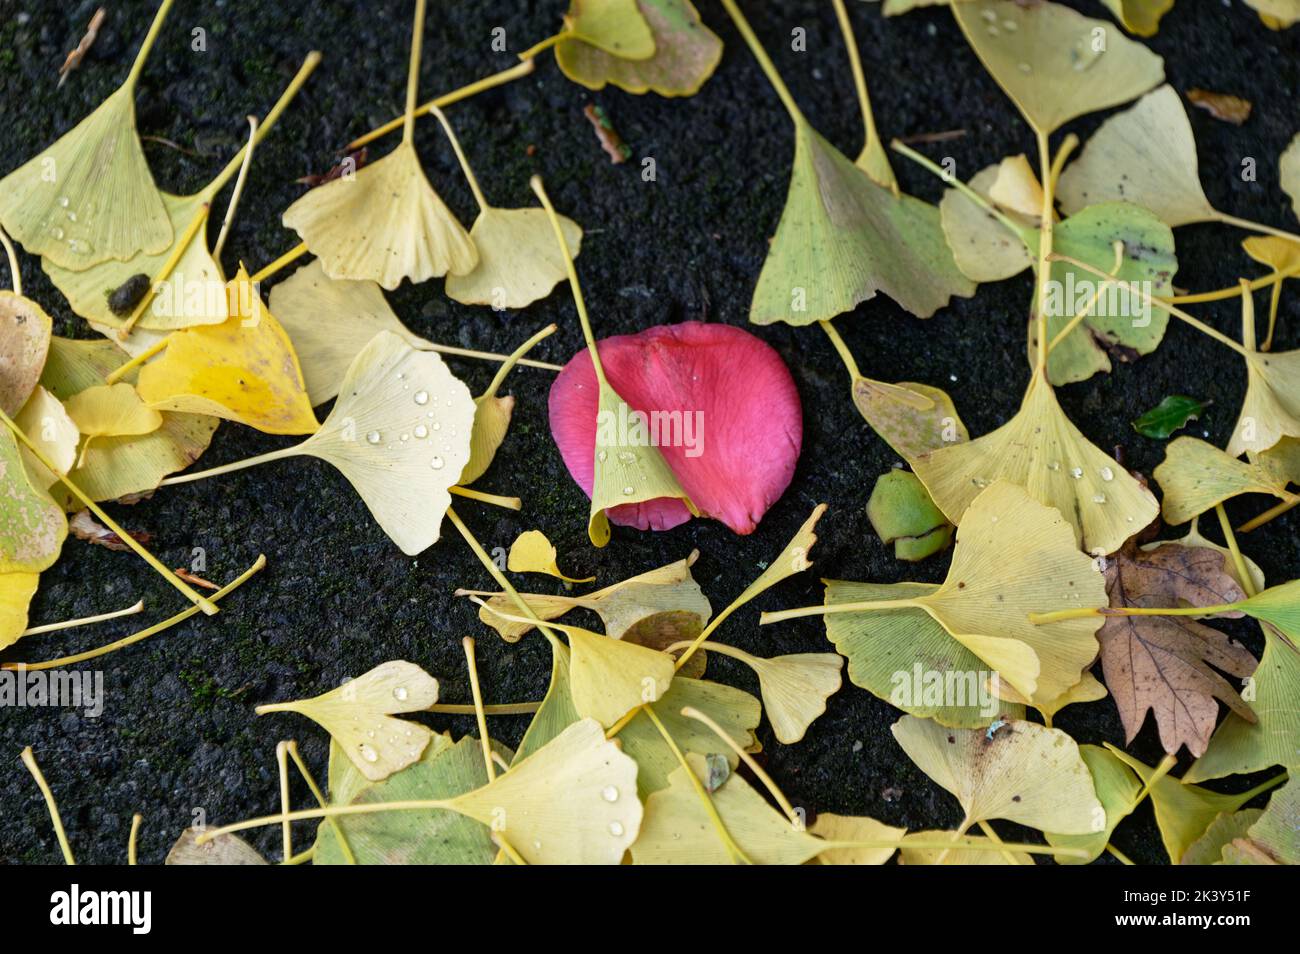 A red camellia flower petal lies on the ground surround by yellowy green gingko leaves, making a nice contrast Stock Photo